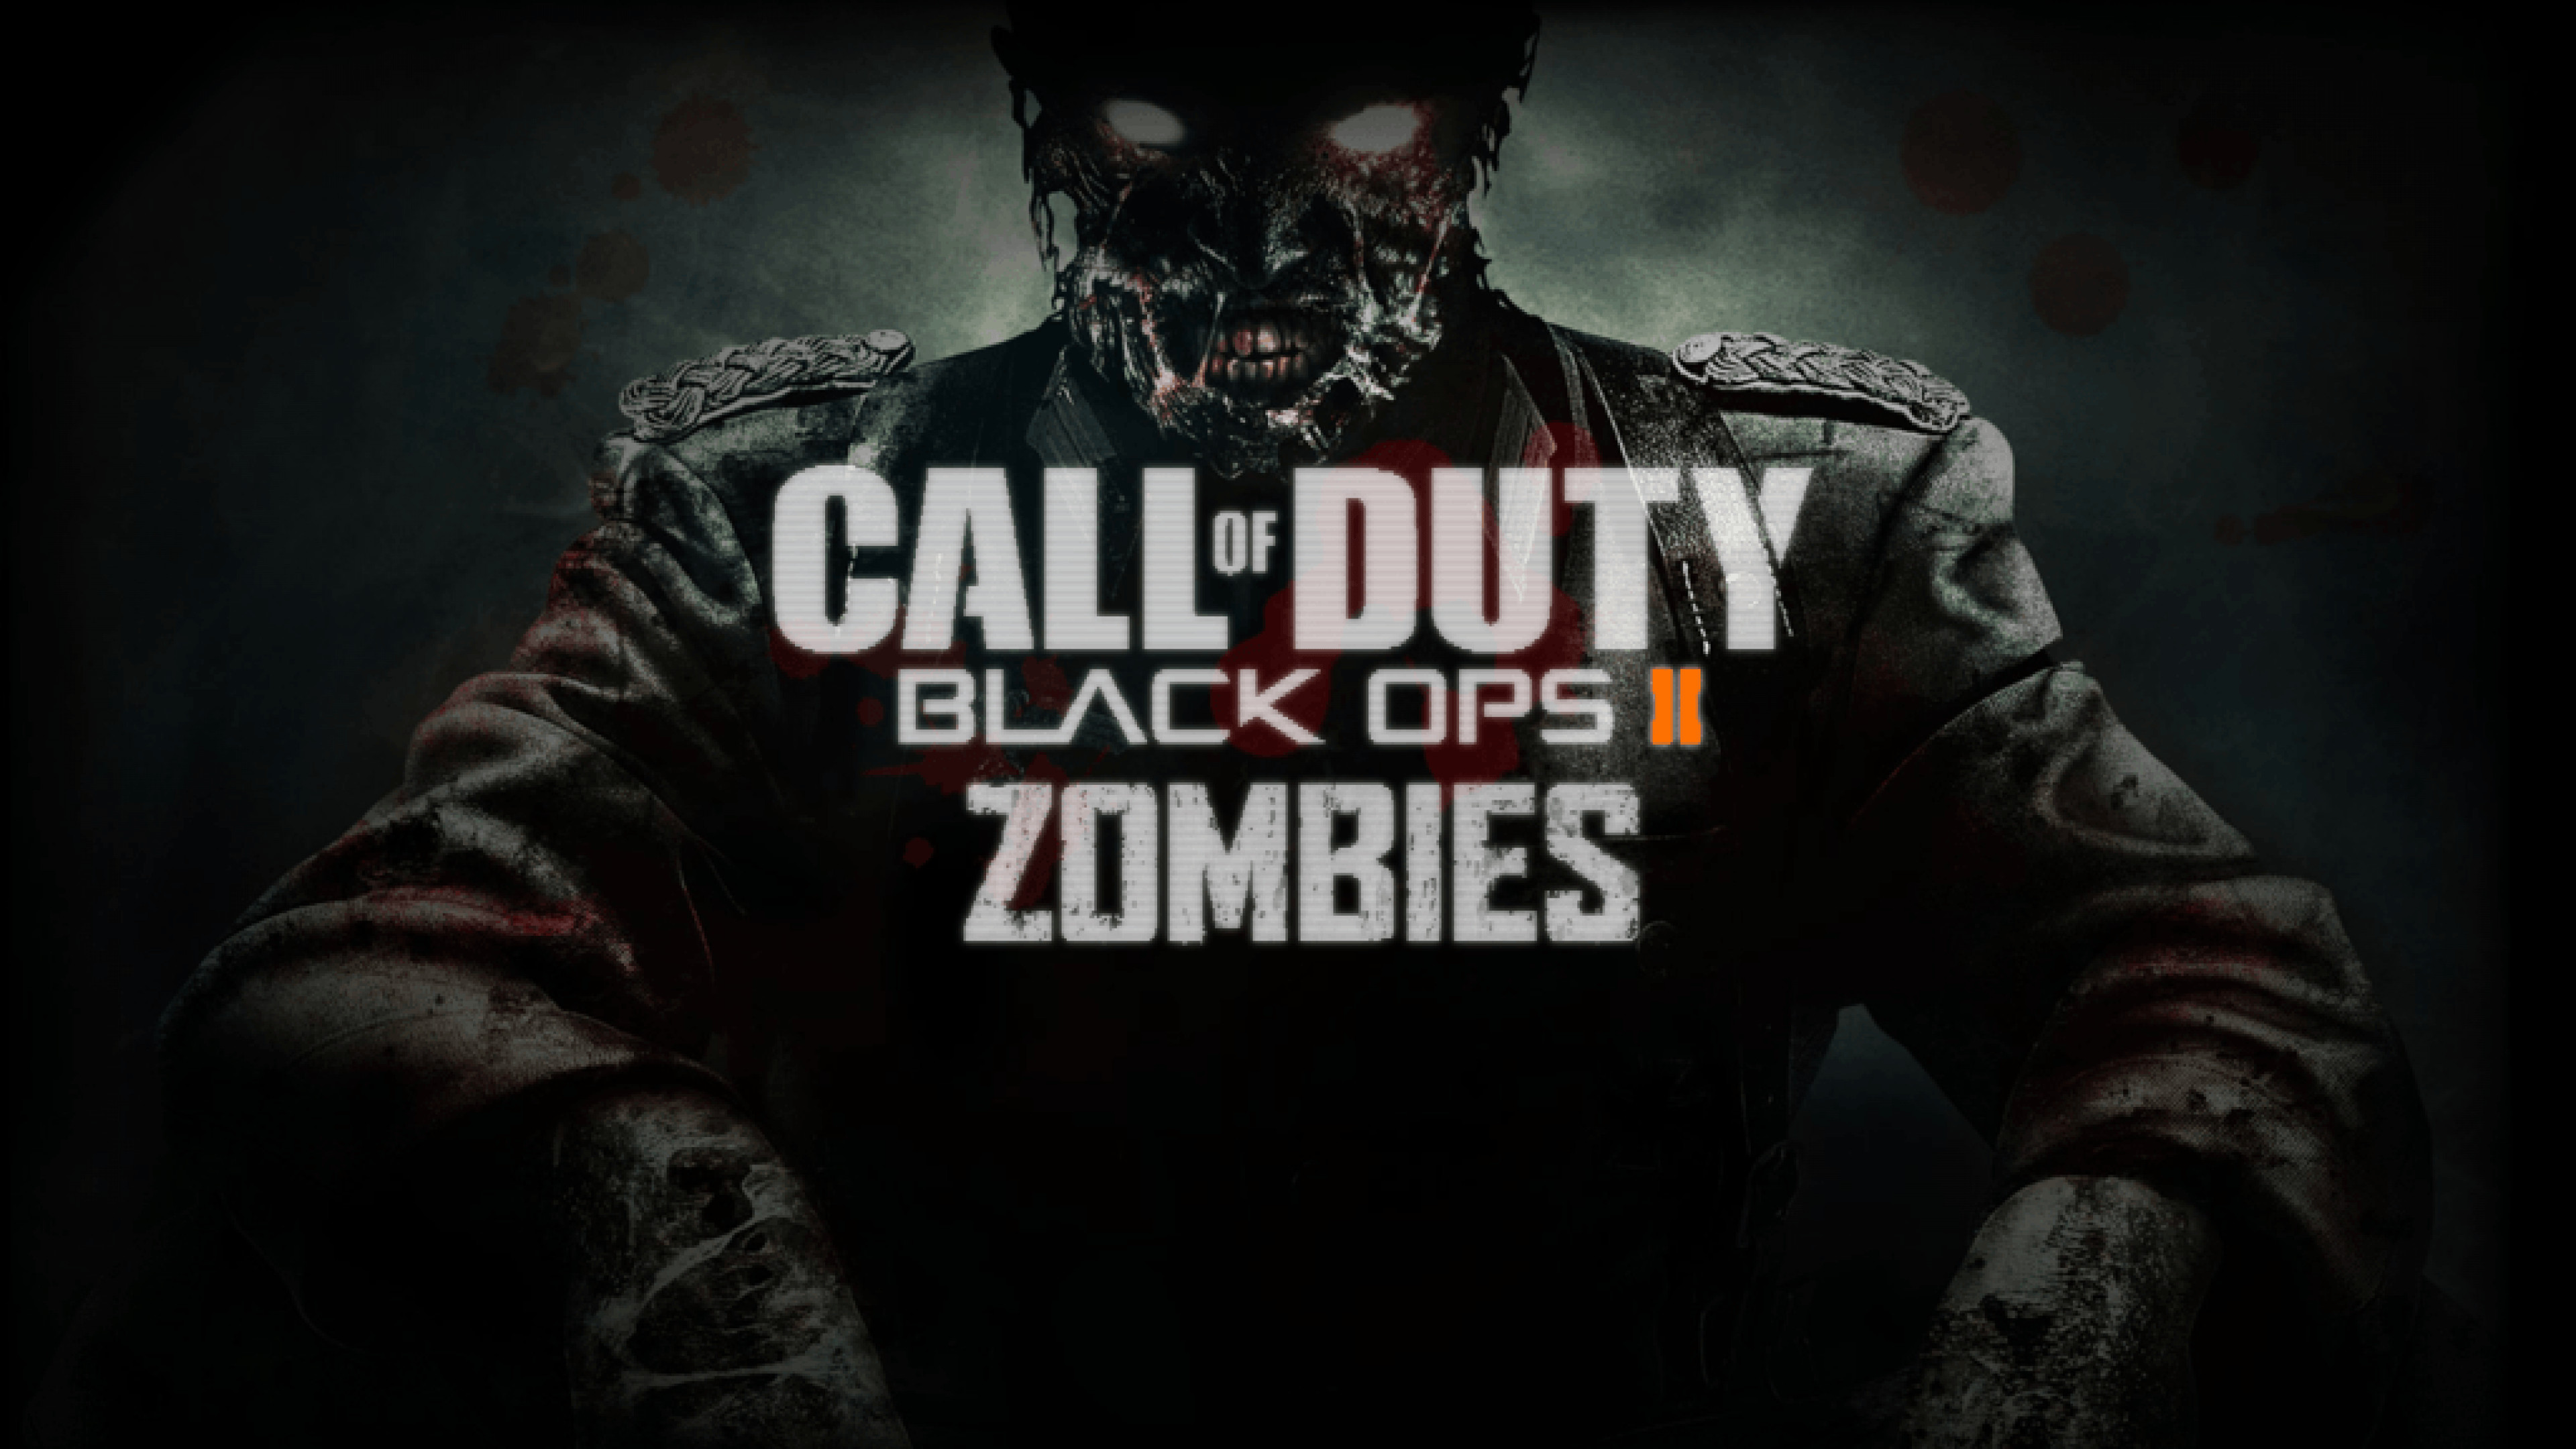 3840x2160 1600x900 Wallpaper Hd For Top Call Of Duty Black Ops Items 2 Pics Iphone  ...">